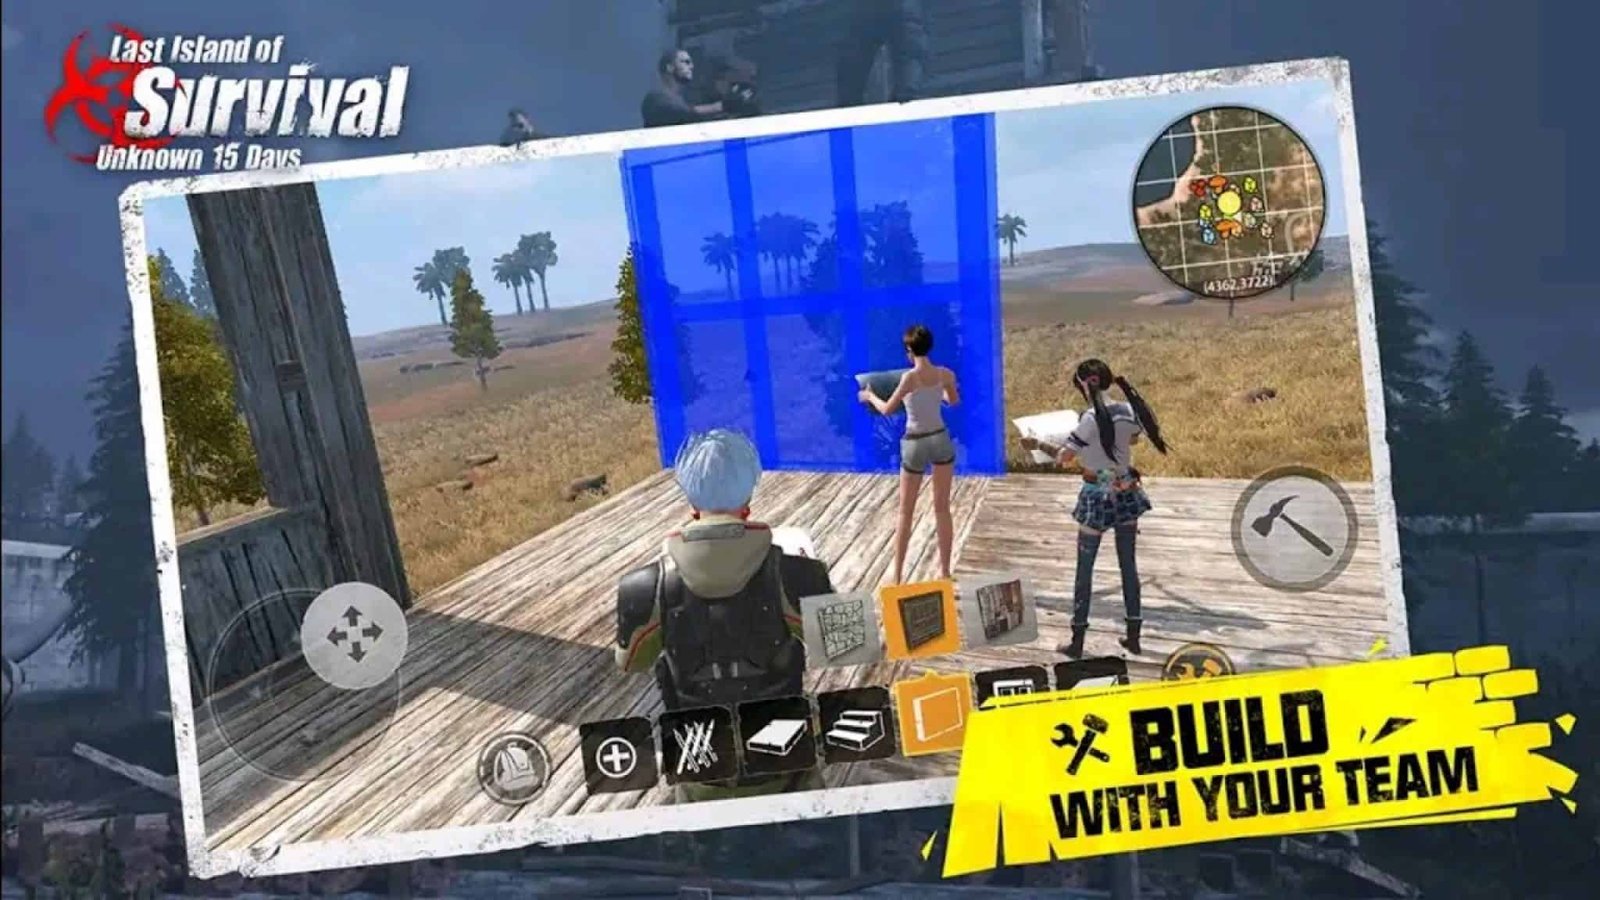 Ласт сурвайвл. Ласт Исланд 15 дейс. Last Island of Survival Unknown 15 Days. Last Island of Survival. Игра last Day Rules Survival.